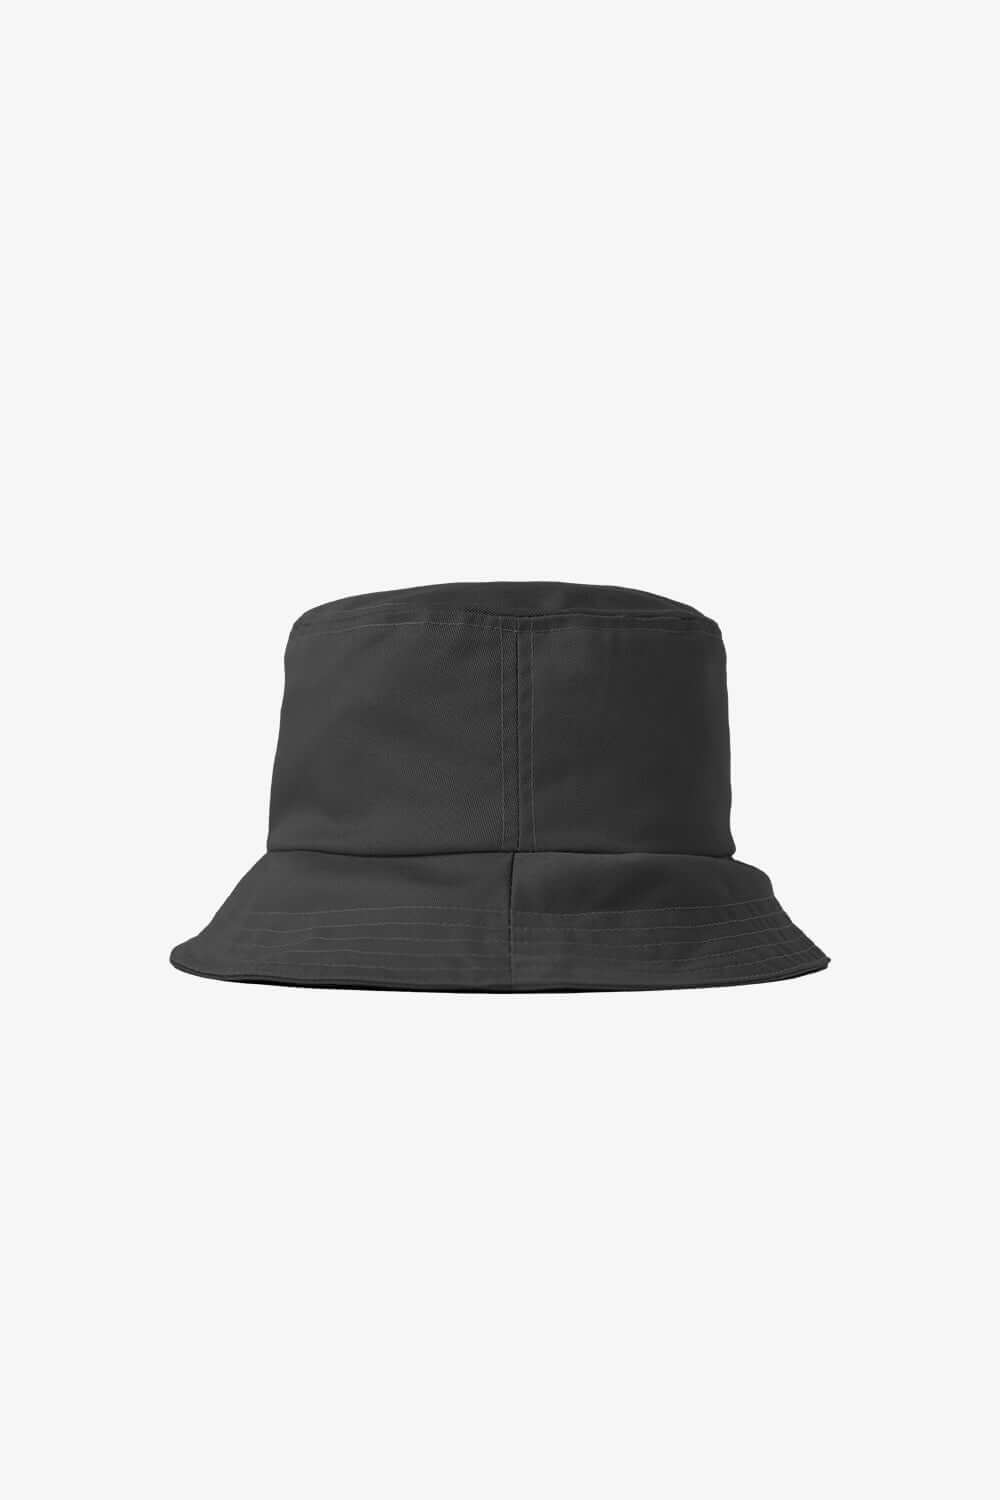 Black Bucket HatDIY Do It Yourself Sewing Kit for Fashionable Clothes